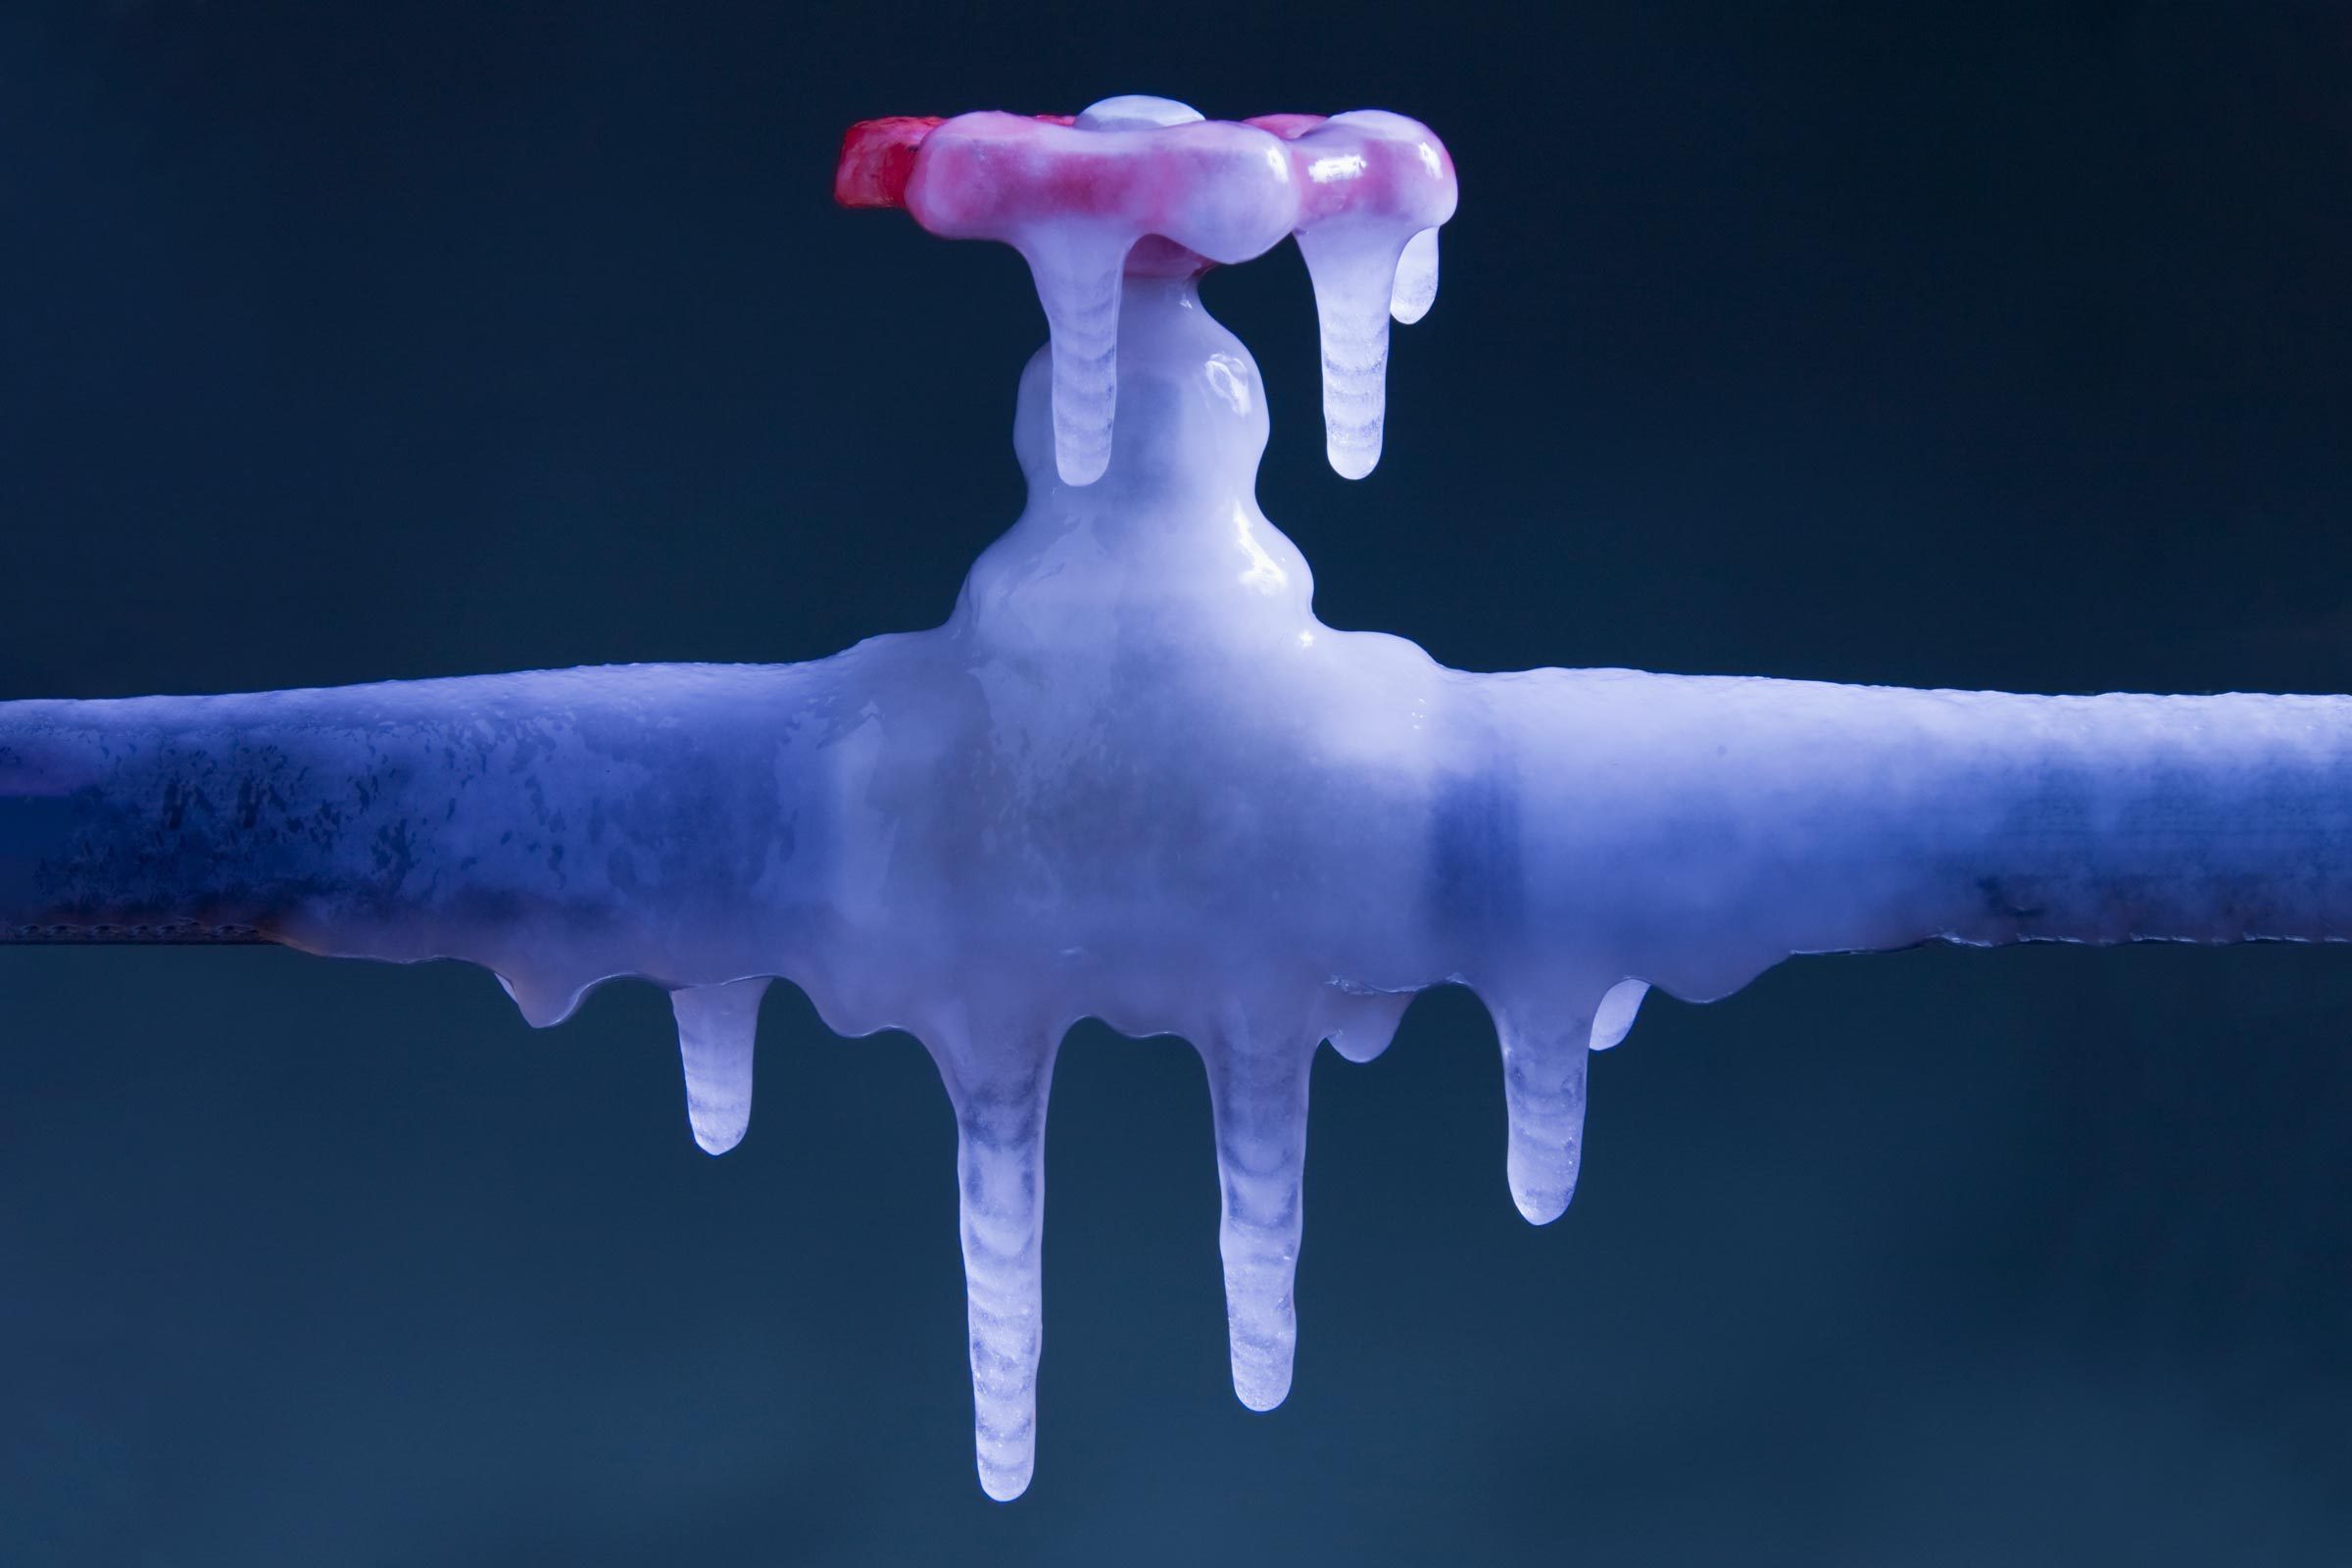 Why Would a Hot Water Pipe Freeze?